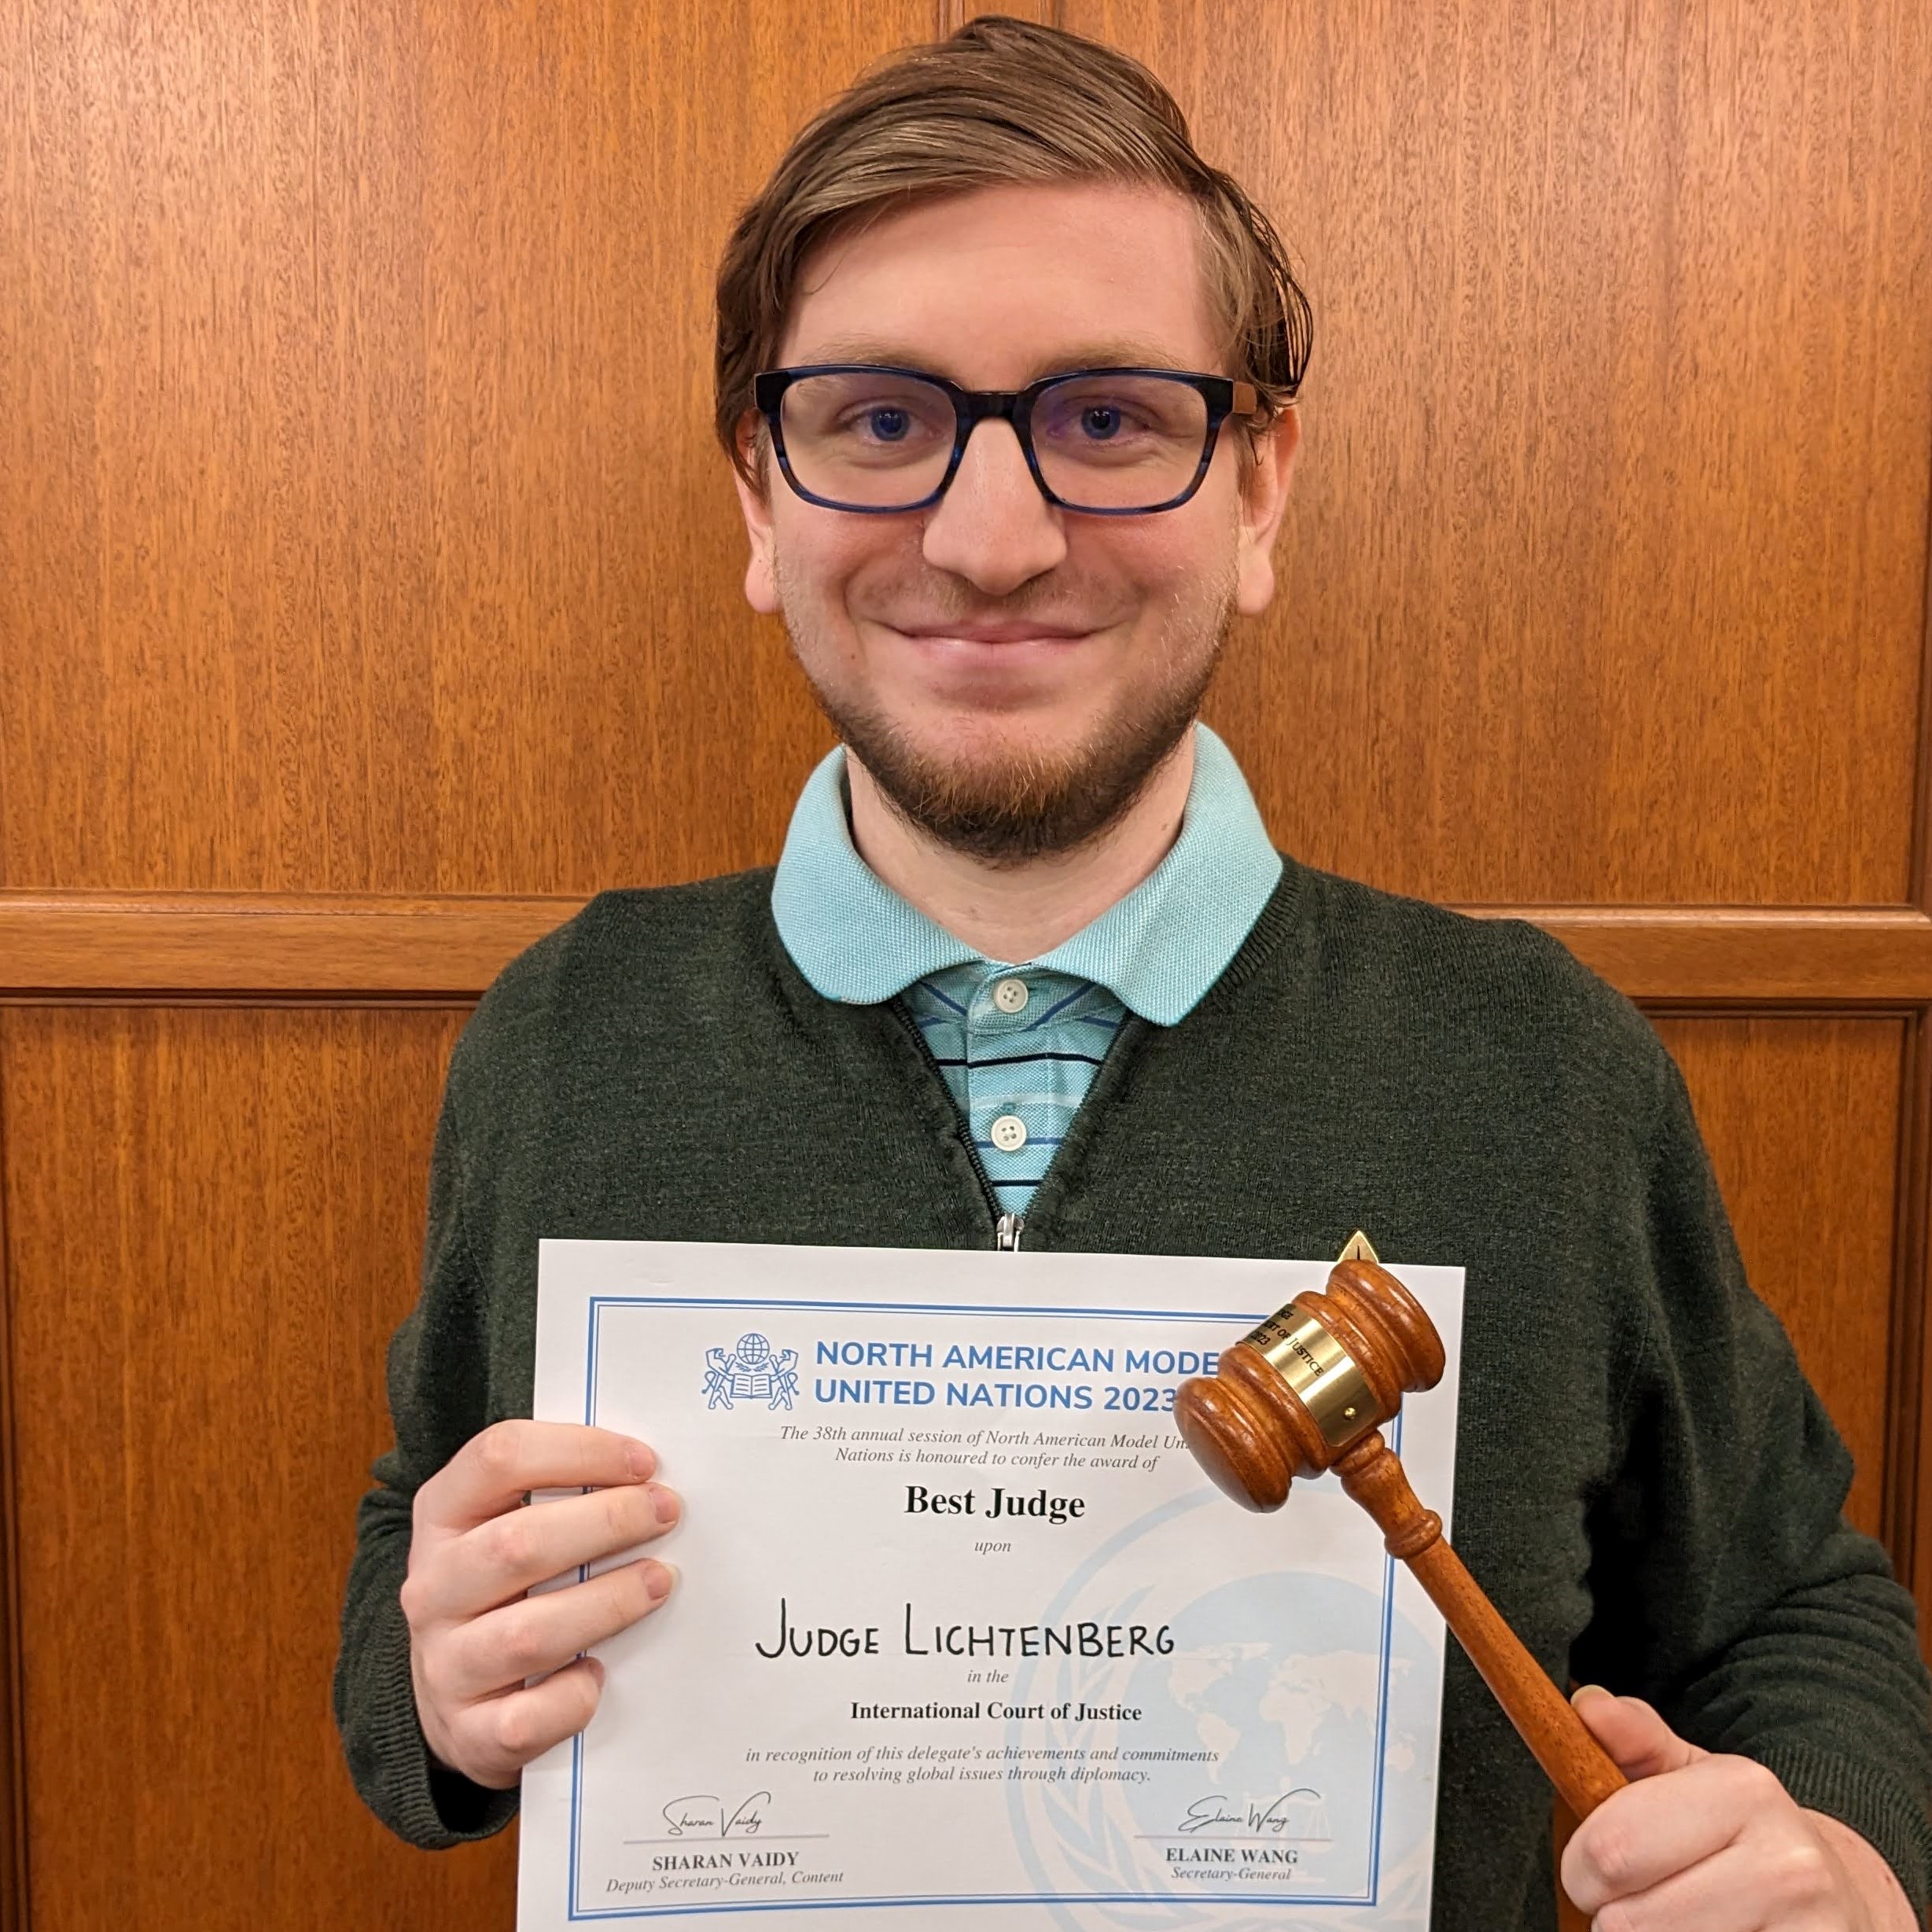 Thomas Lichtenberg holding a gavel and best judge certificate